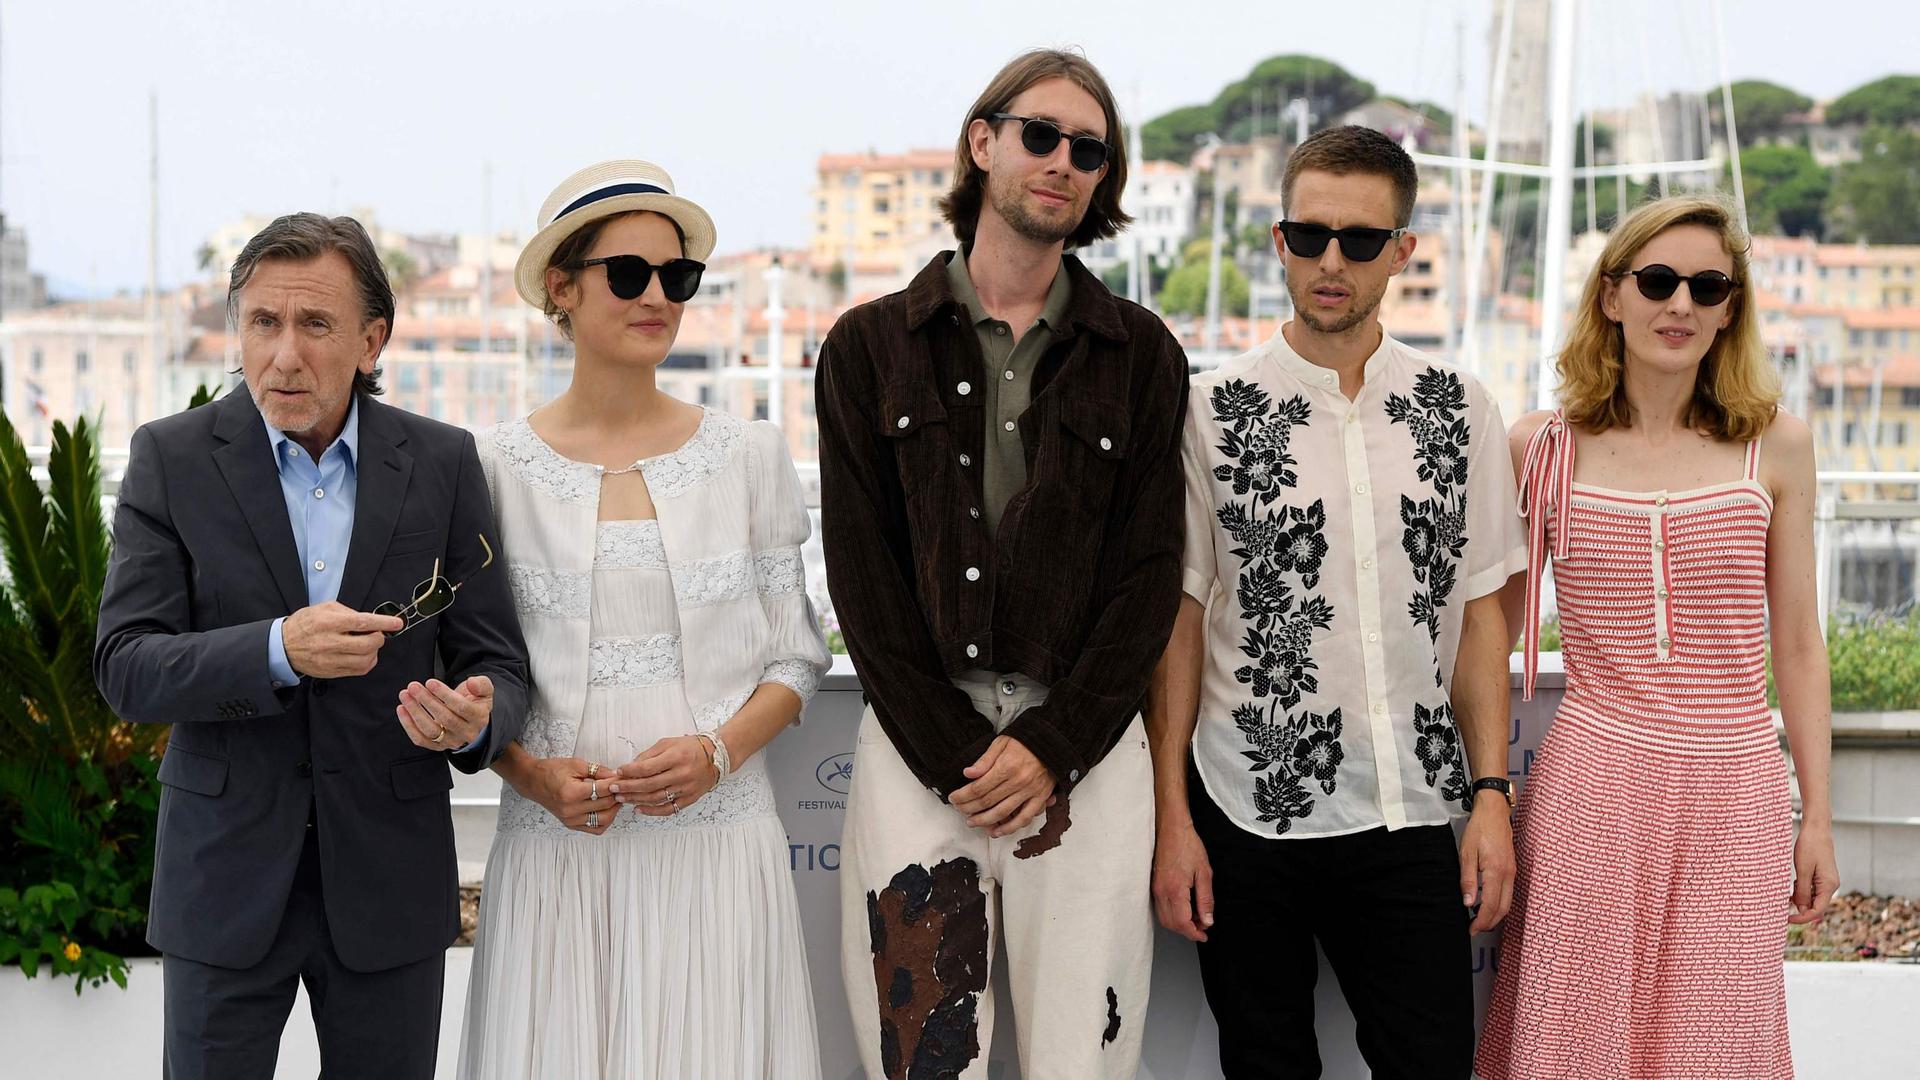 (fromL) British actor Tim Roth, Luxembourg actress Vicky Krieps, Swedish actor Hampus Nordenson, Norwegian actor Anders Danielsen Lie and French director Mia Hansen-Love pose  during a photocall for the film "Bergman Island" at the 74th edition of the Cannes Film Festival in Cannes, southern France, on July 12, 2021. (Photo by CHRISTOPHE SIMON / AFP)